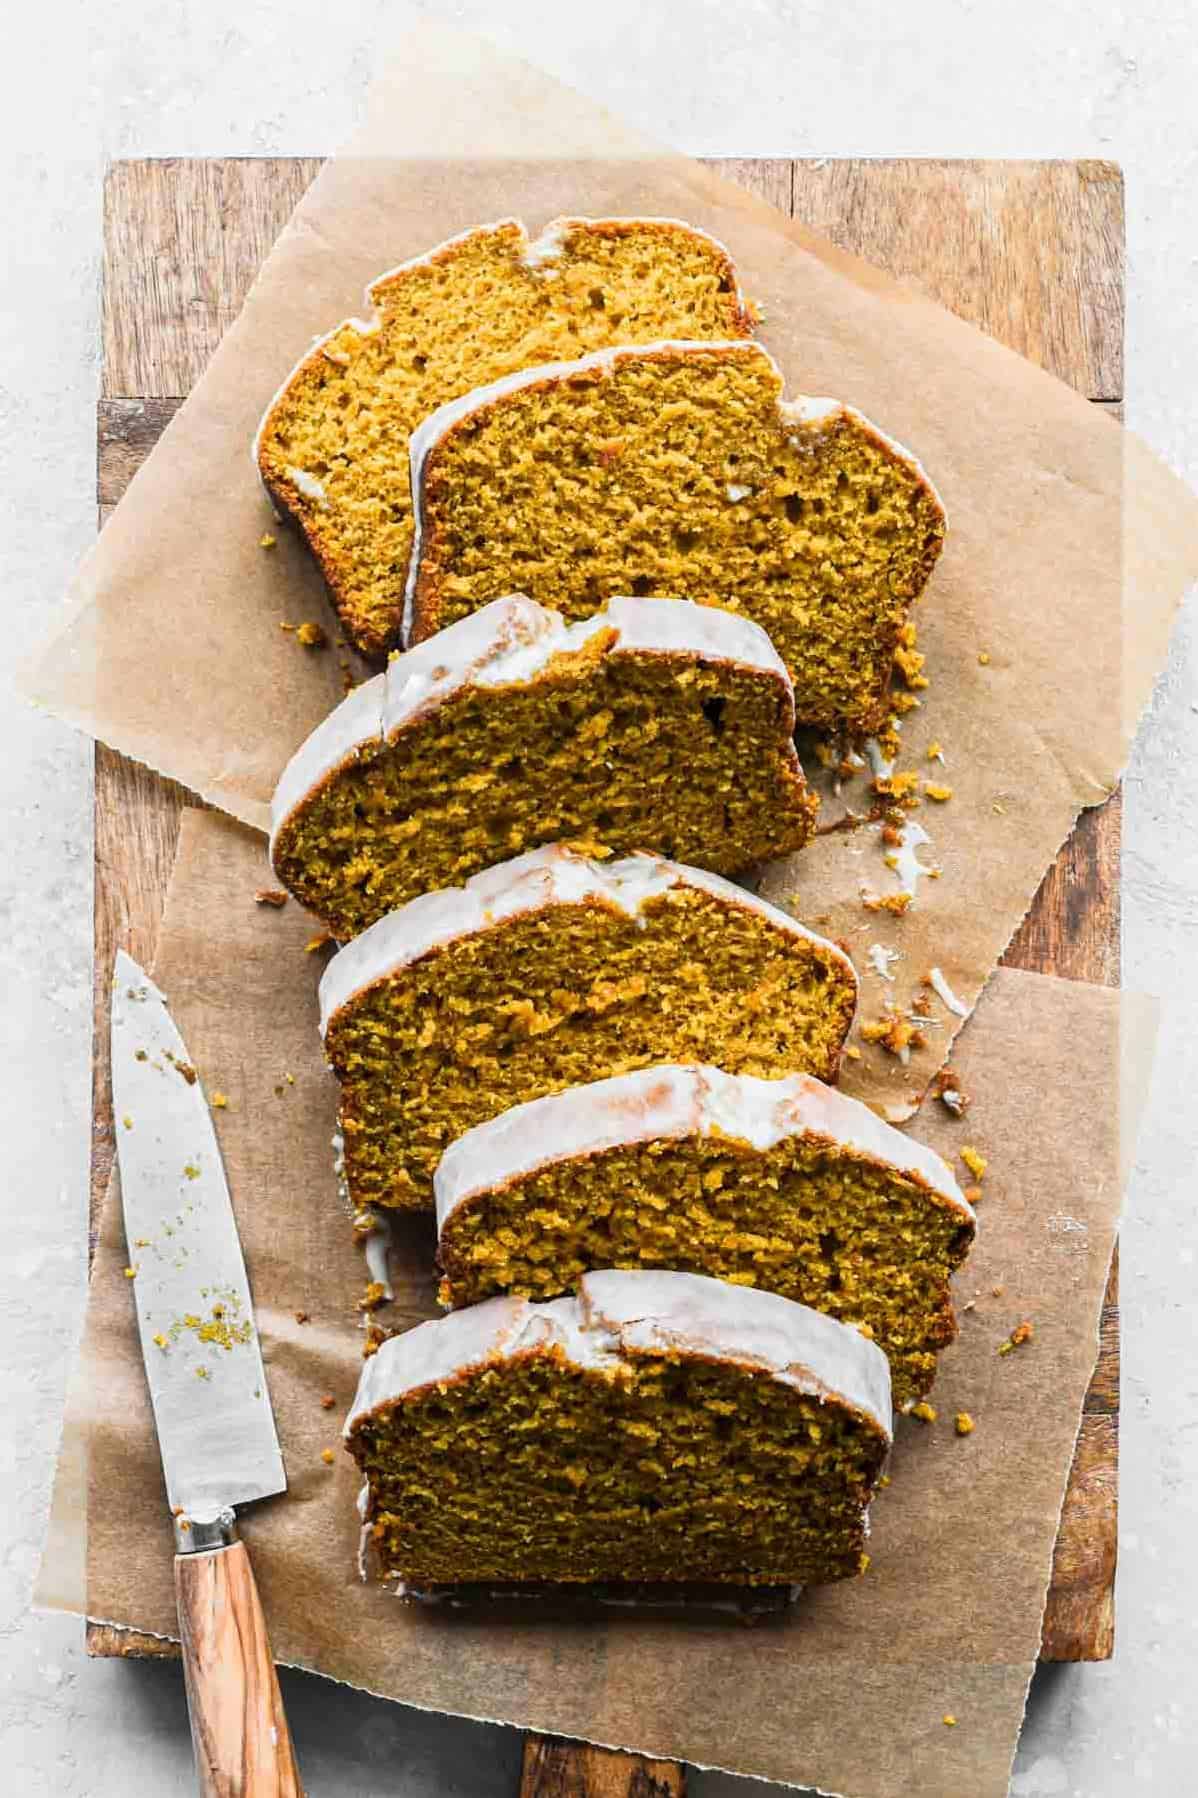  Maple syrup takes this pumpkin bread to the next level